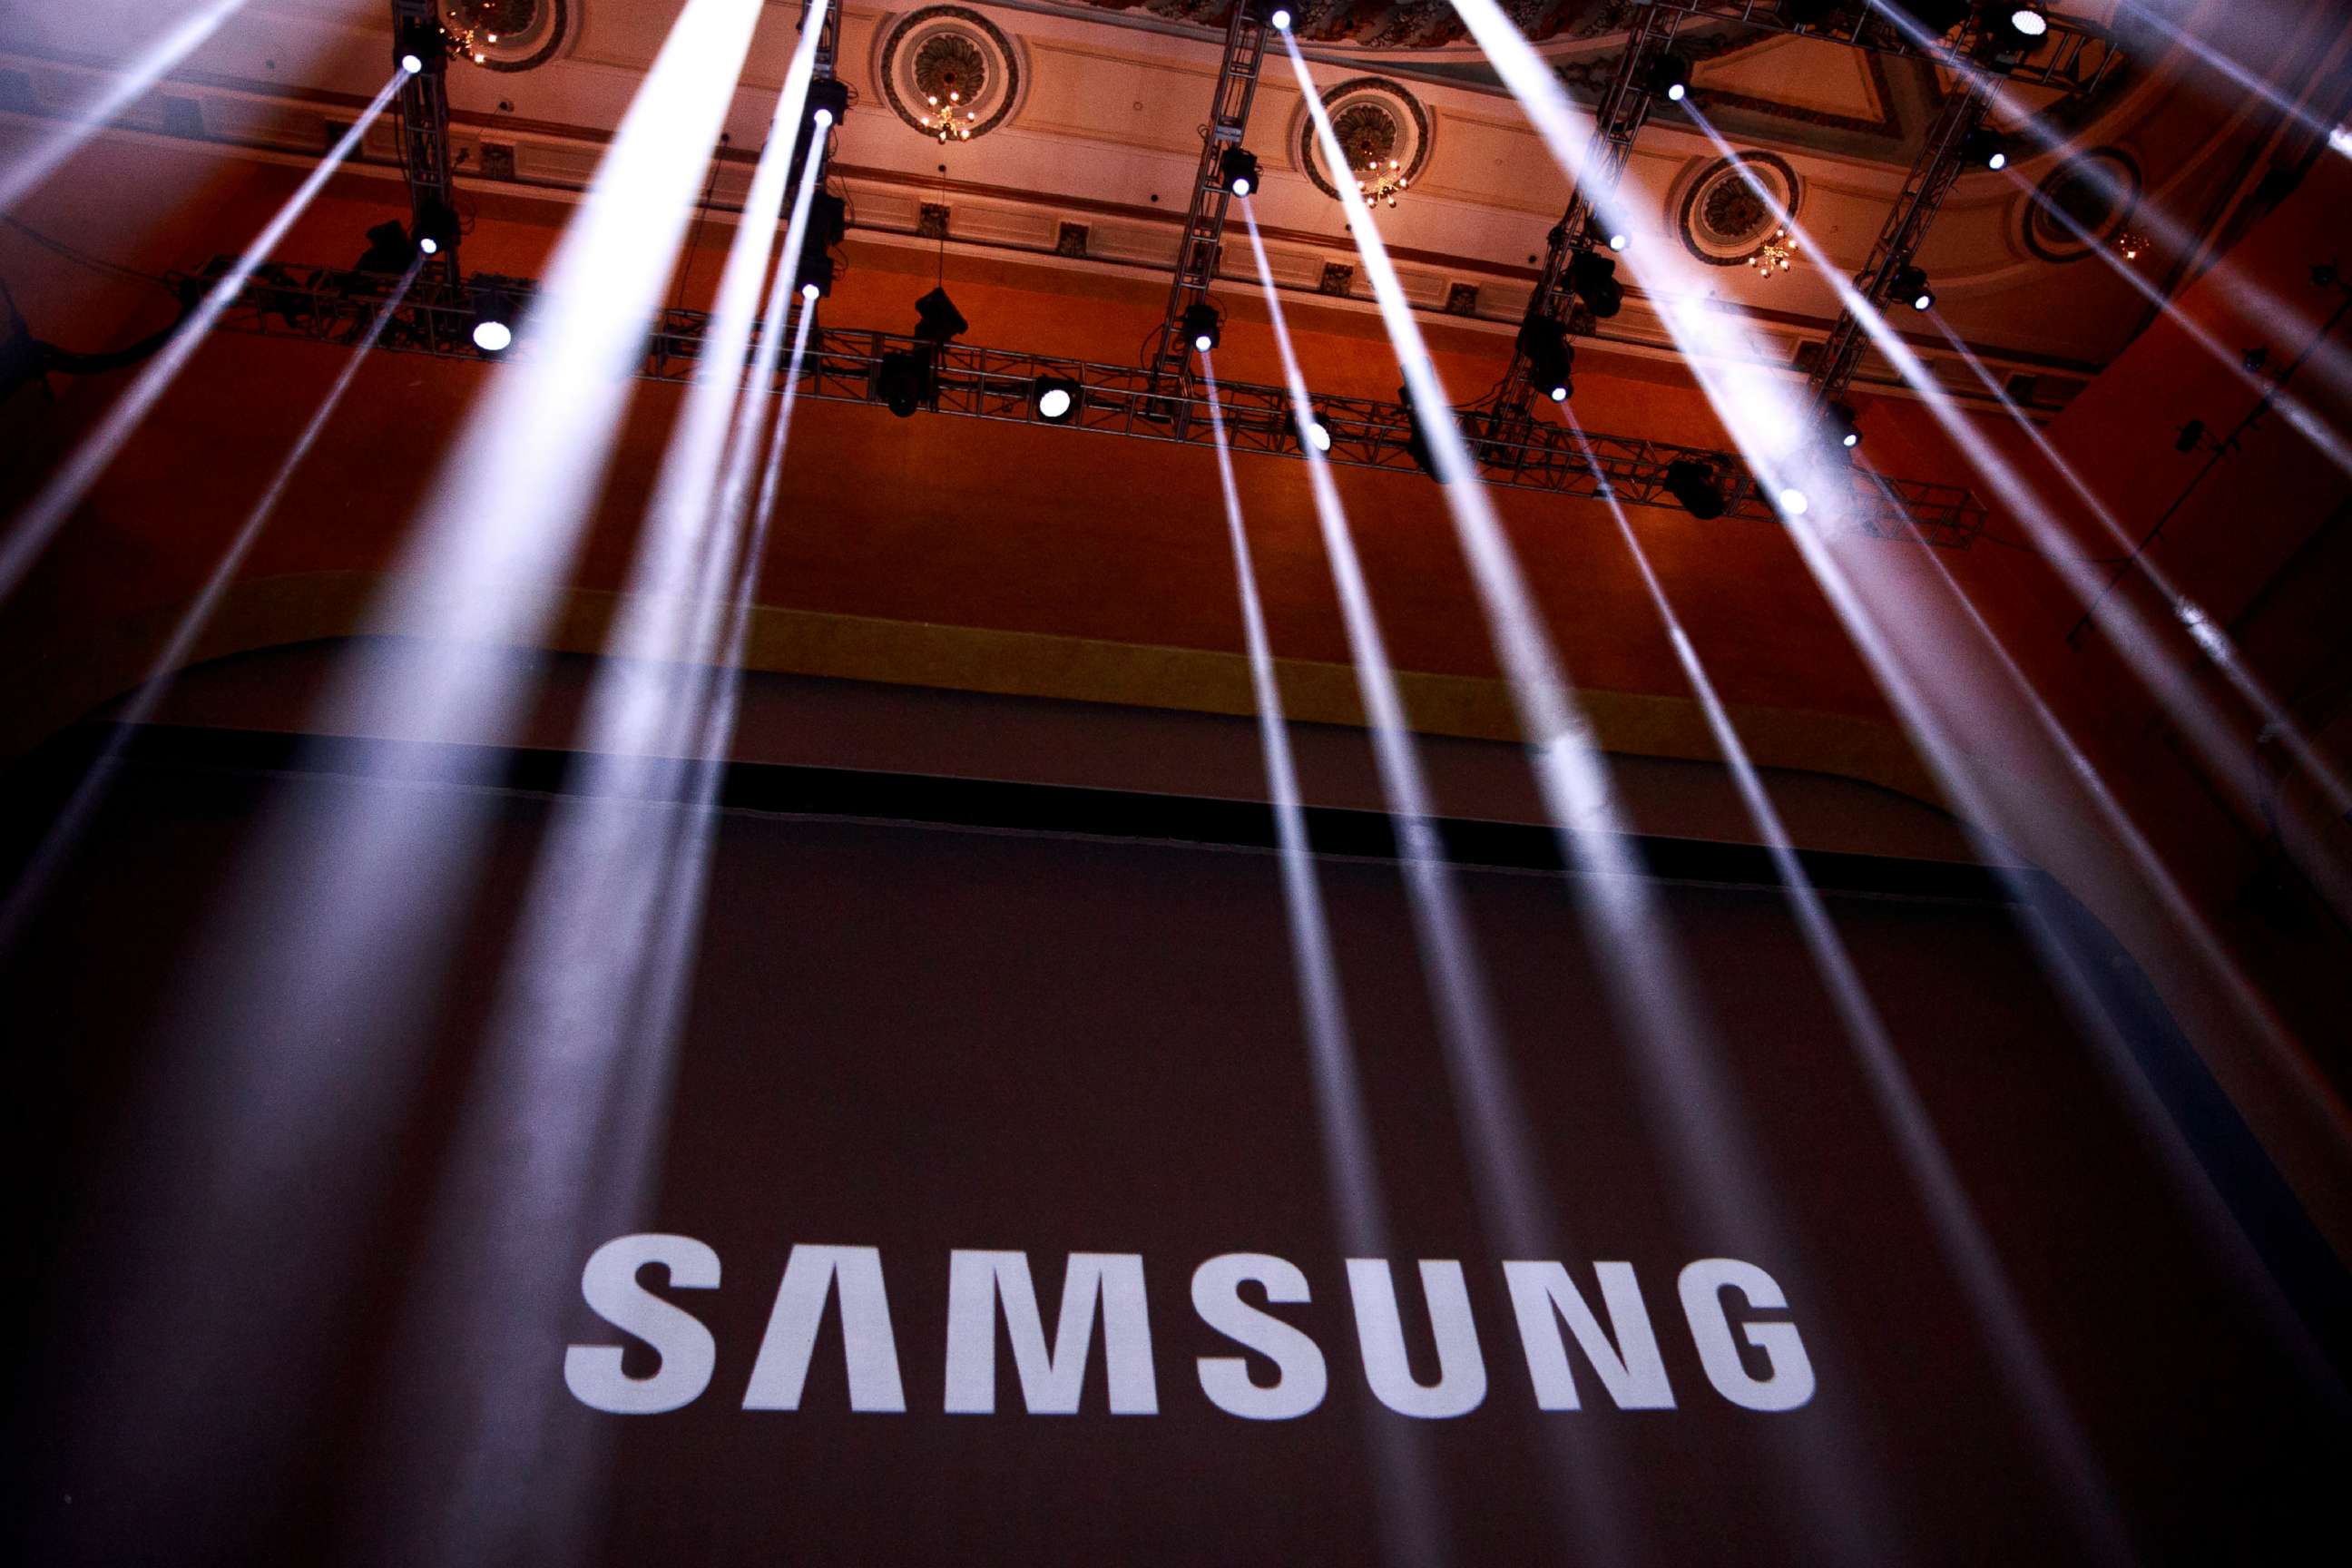 PHOTO: The Samsung logo is displayed on a screen during an event in New York City, Aug. 2, 2016.